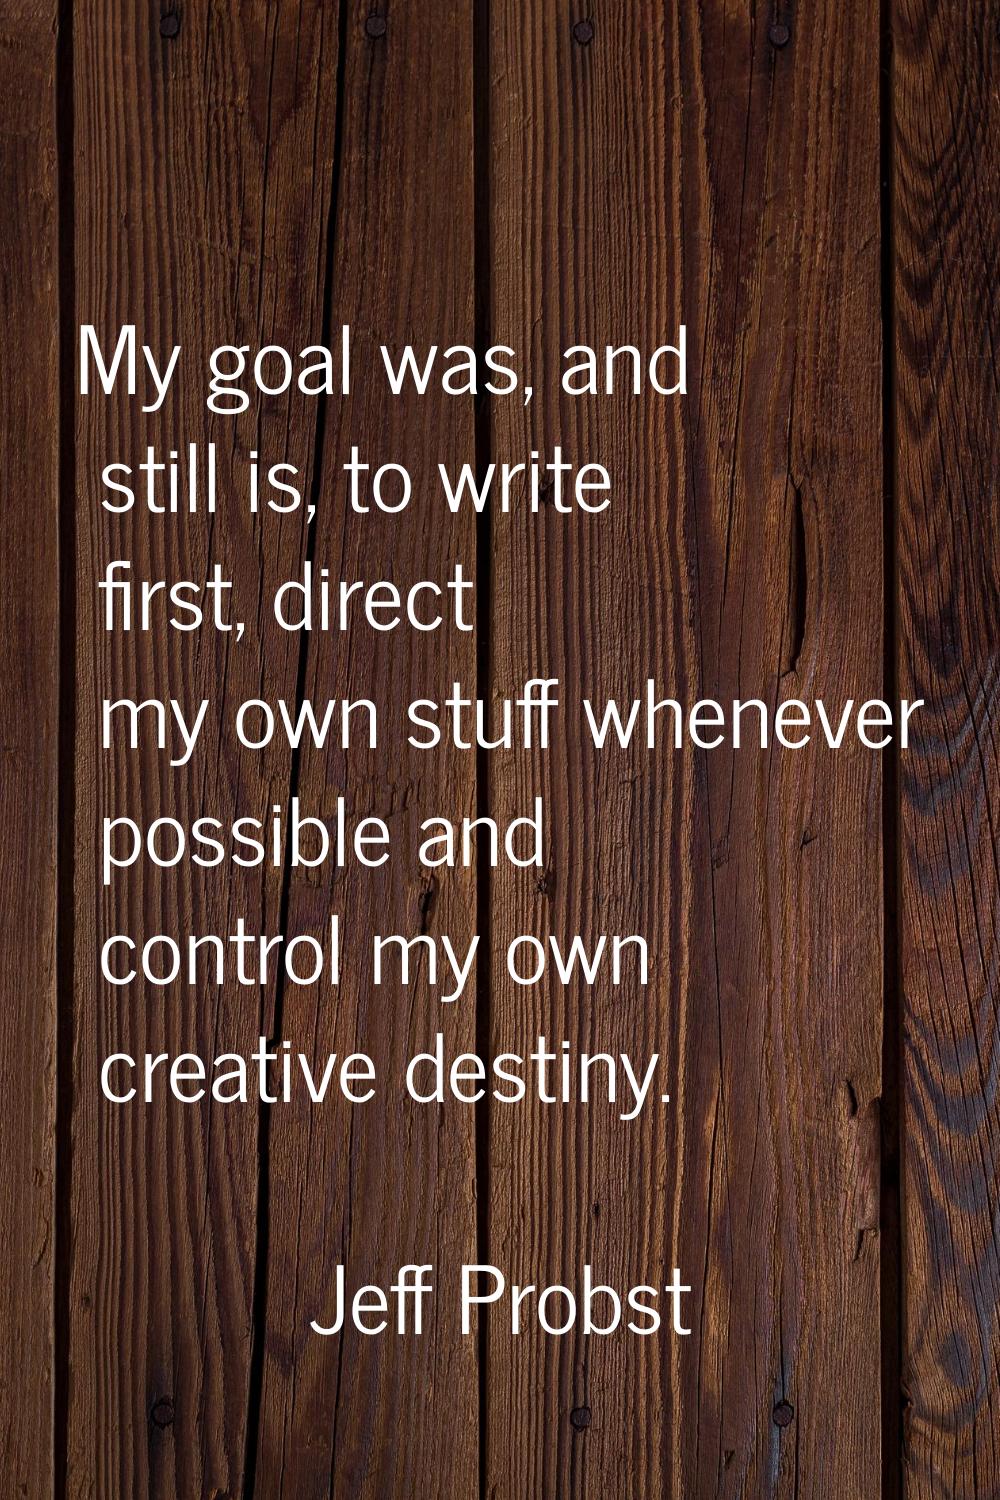 My goal was, and still is, to write first, direct my own stuff whenever possible and control my own